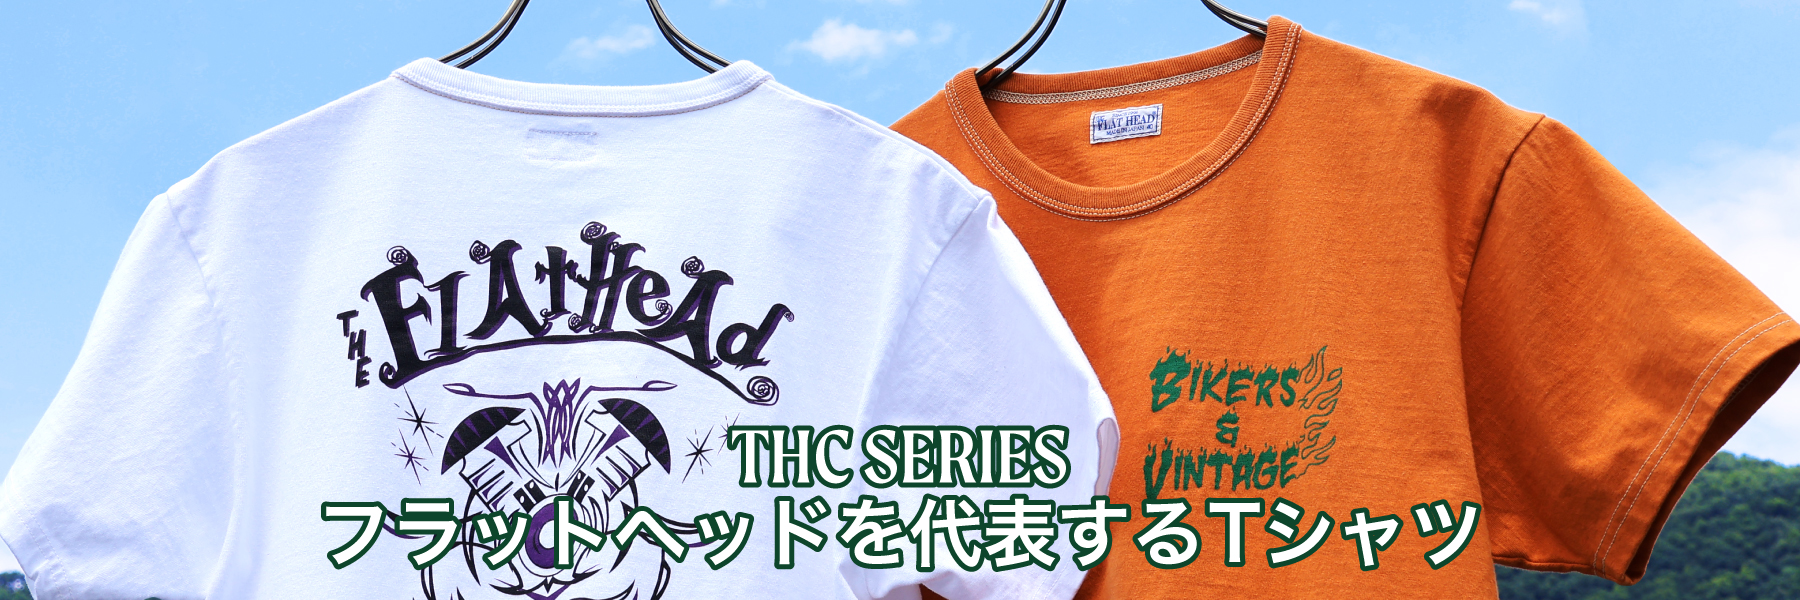 fratto Tシャツ SS